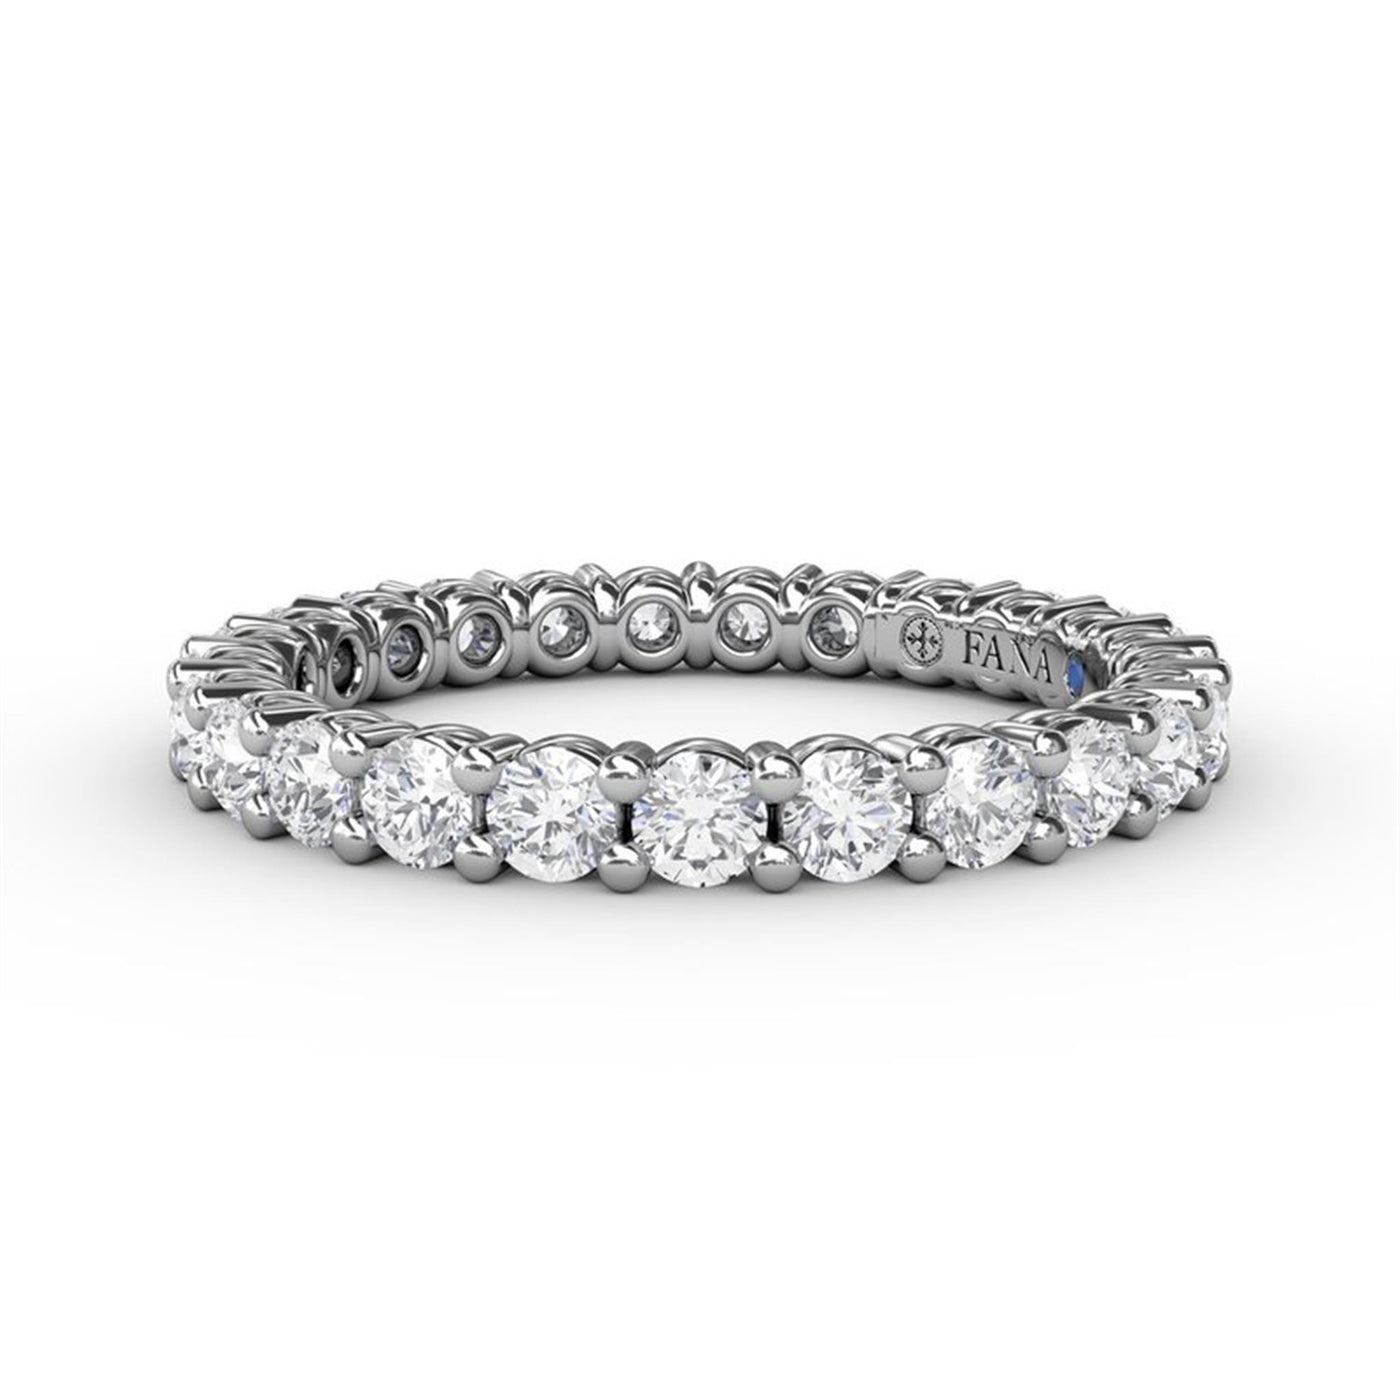 14K White Gold 1.25ctw Diamond Eternity Band 
Featuring a Polished Finish